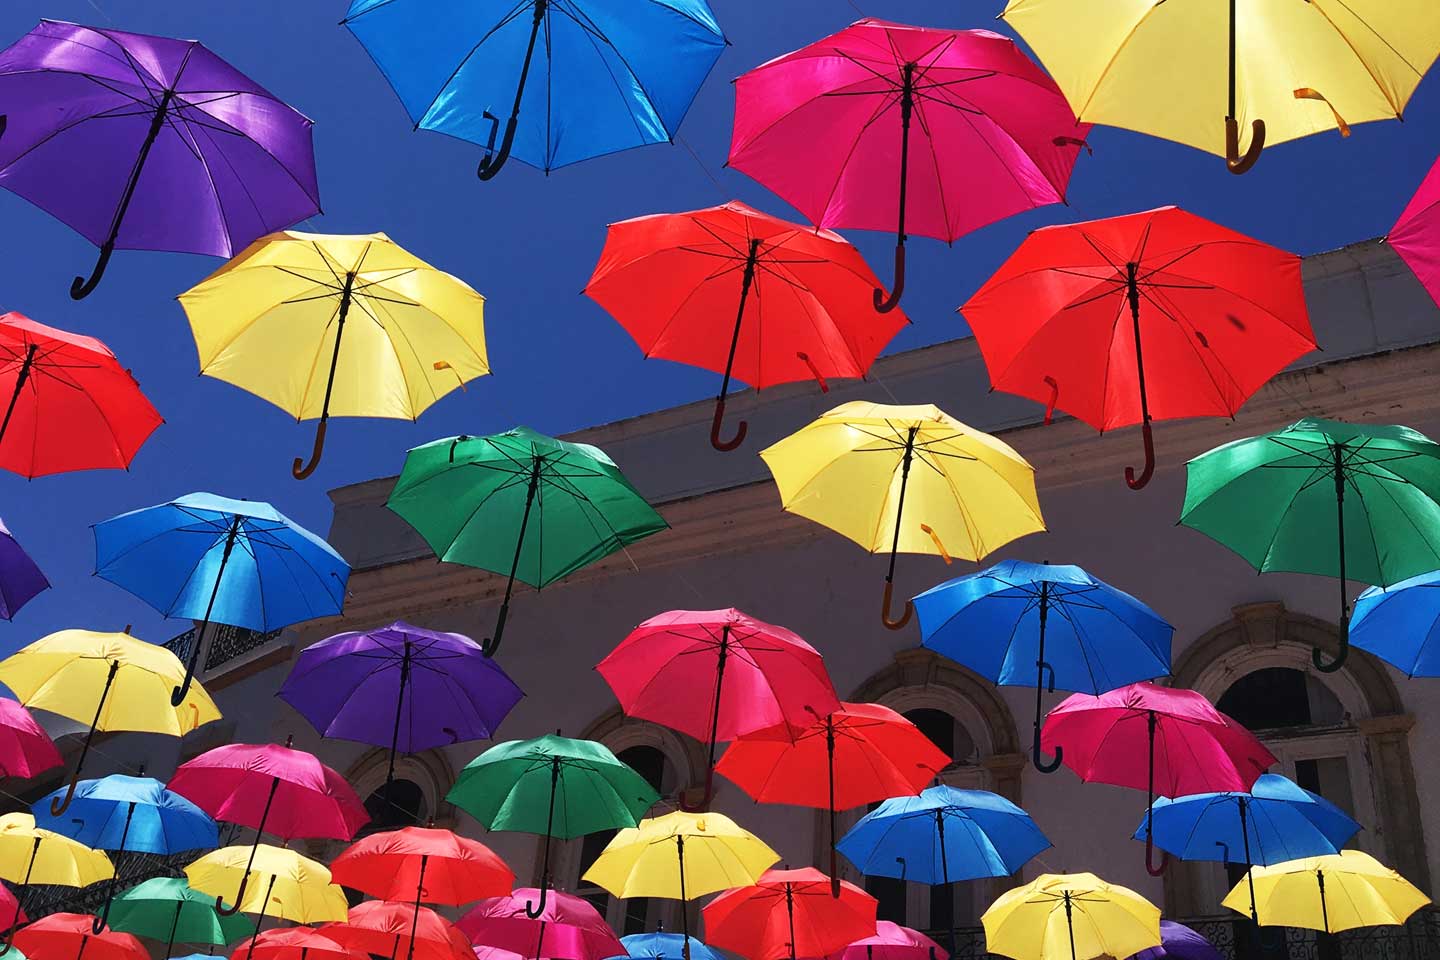 Colourful umbrellas decorate the streets of Olhao in the Eastern Algarve, home of Blinking Flamingos